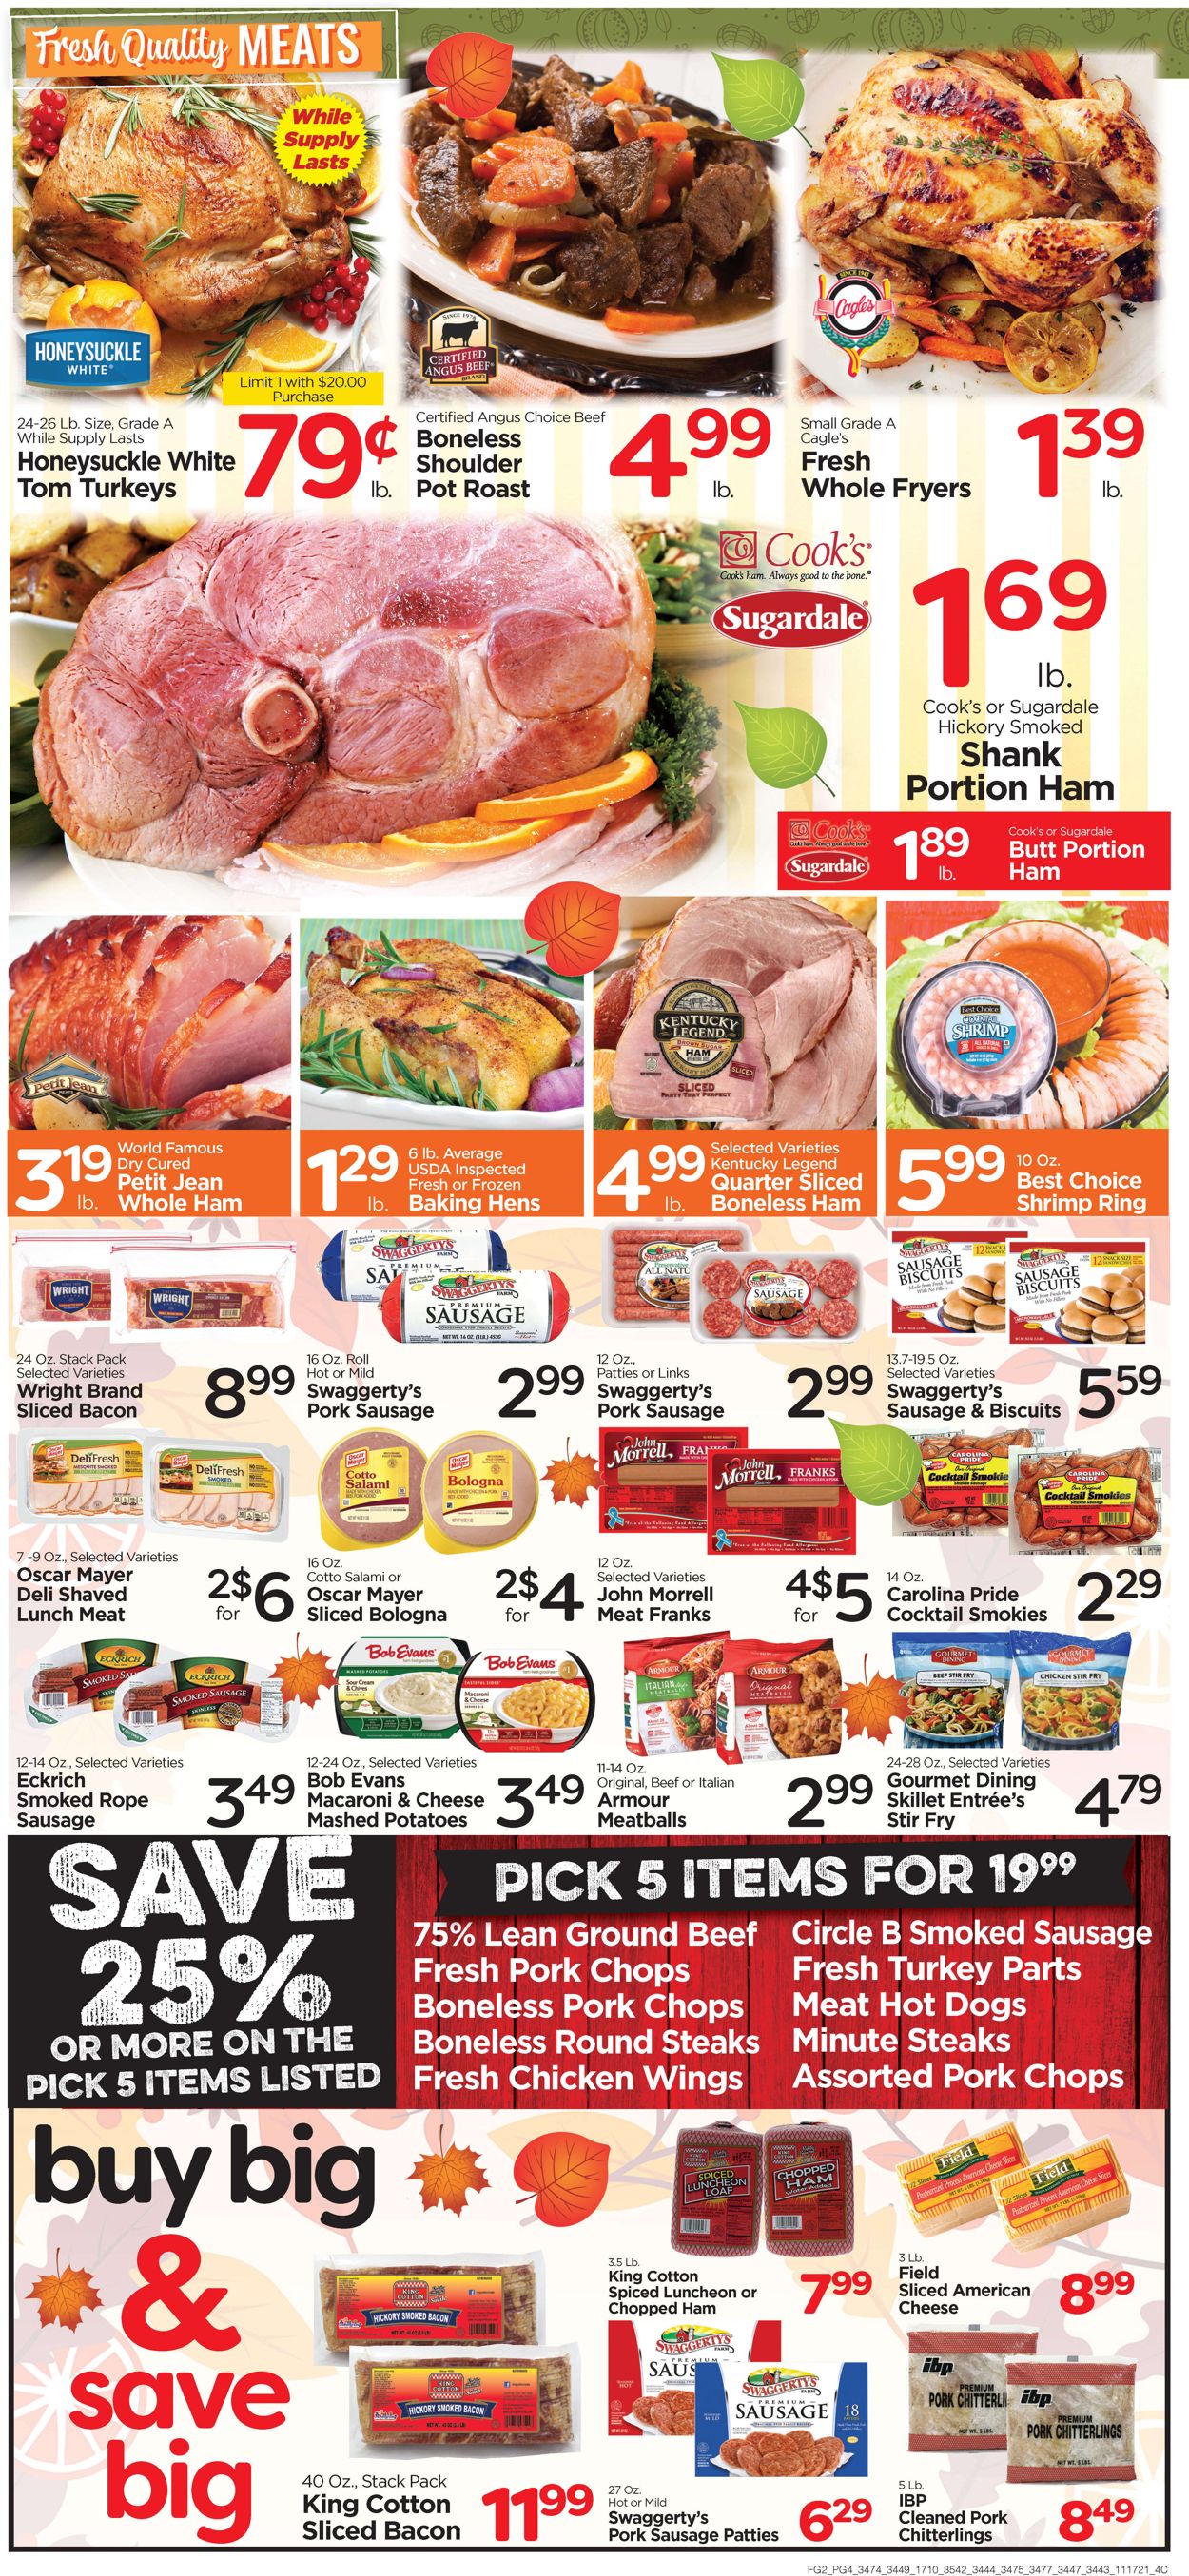 Catalogue Edwards Food Giant THANKSGIVING 2021 from 11/17/2021